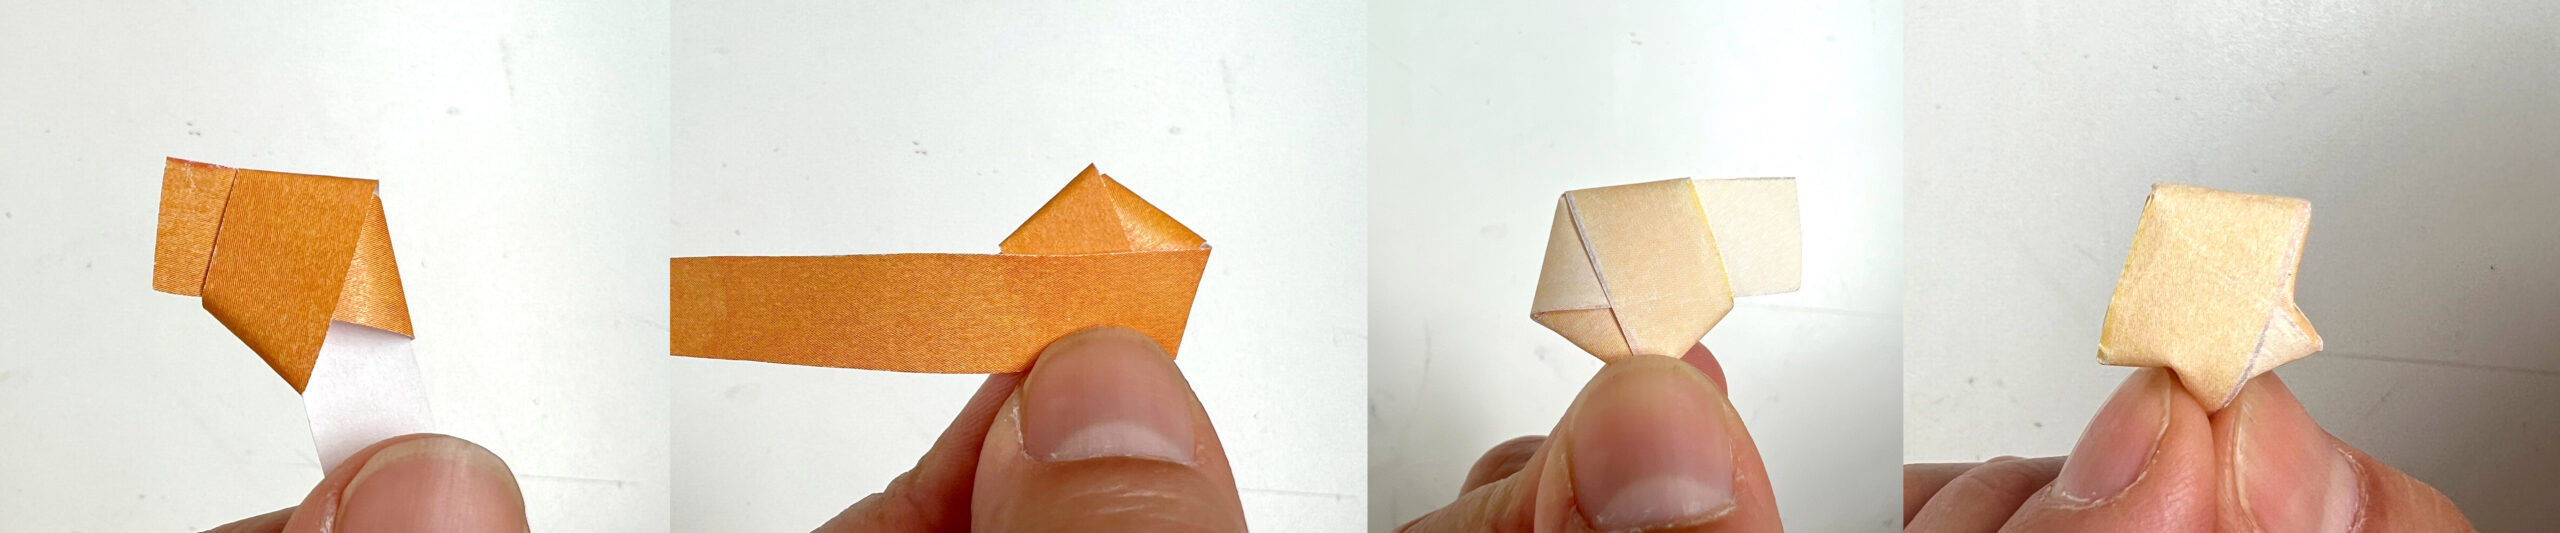 image of a hand holding a paper strip, showing how to fold a small star